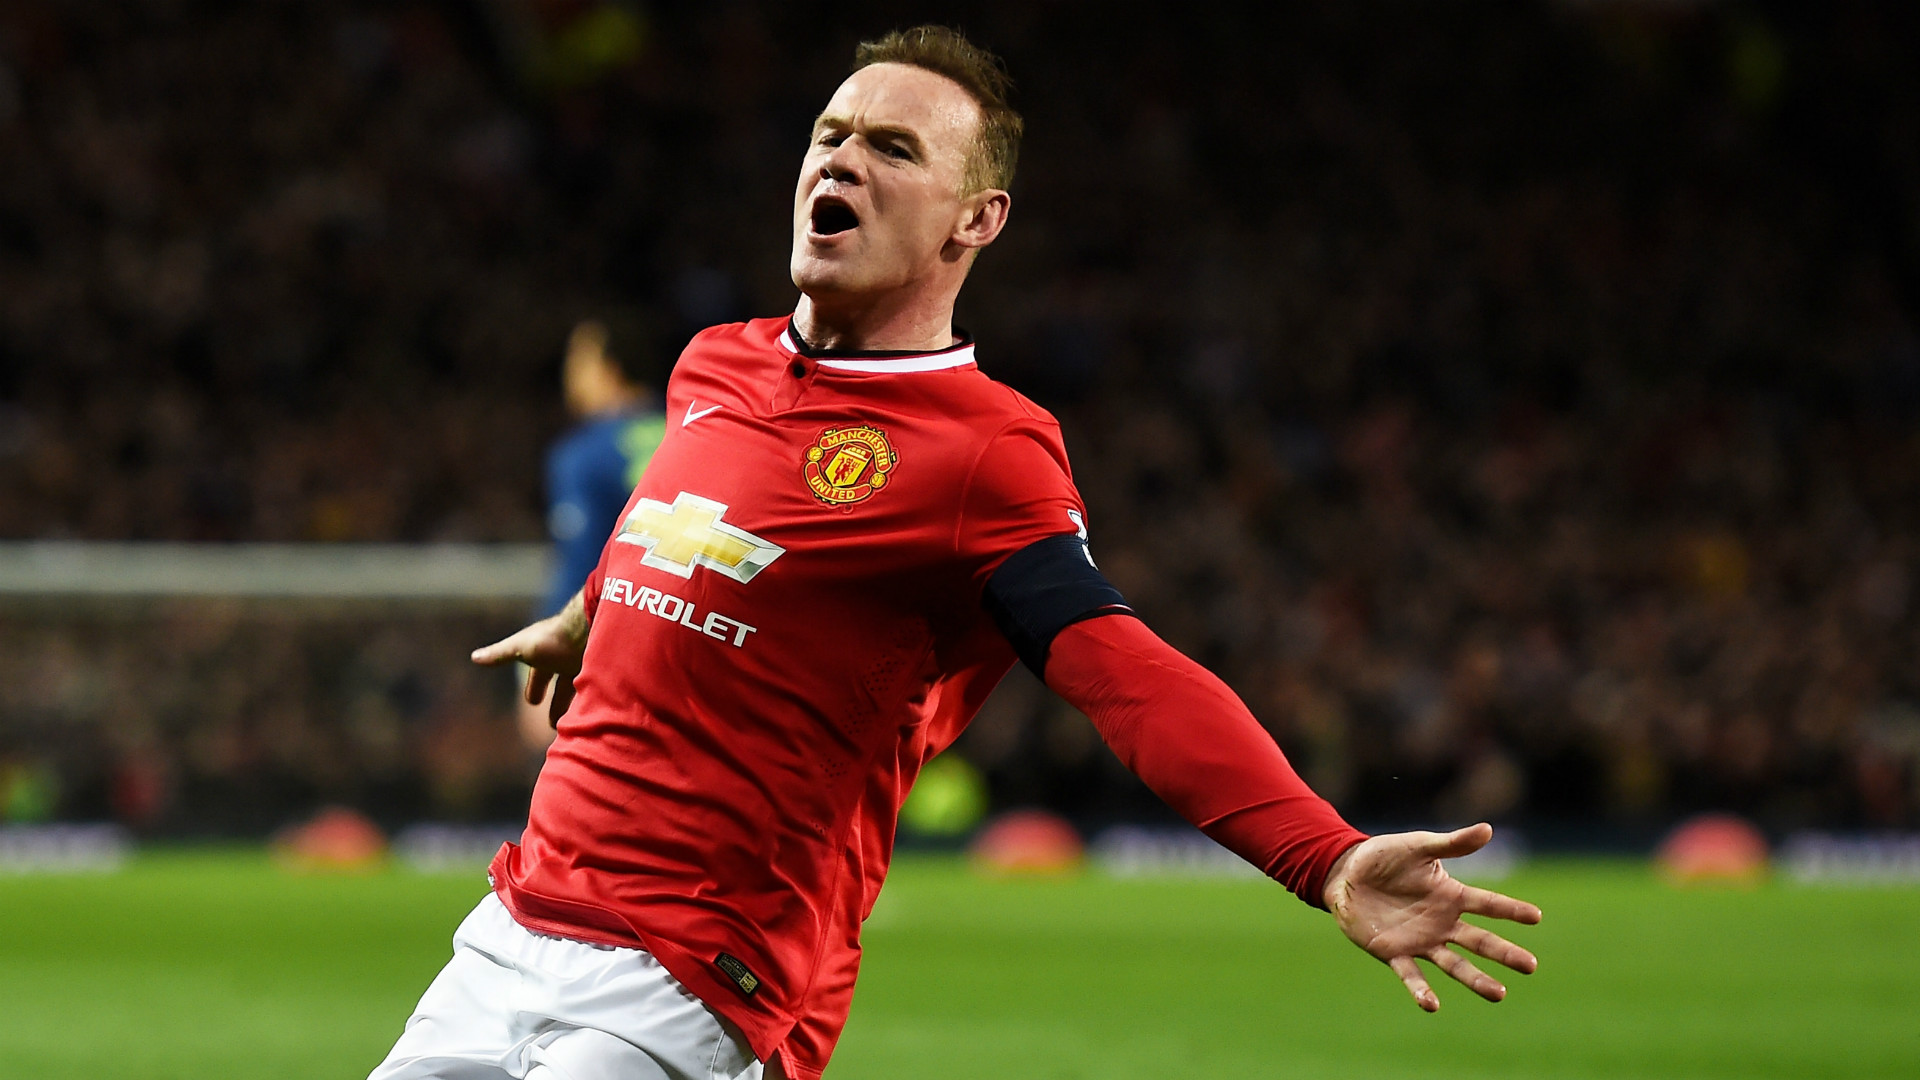 How old is Wayne Rooney? How much does he earn? Your top questions